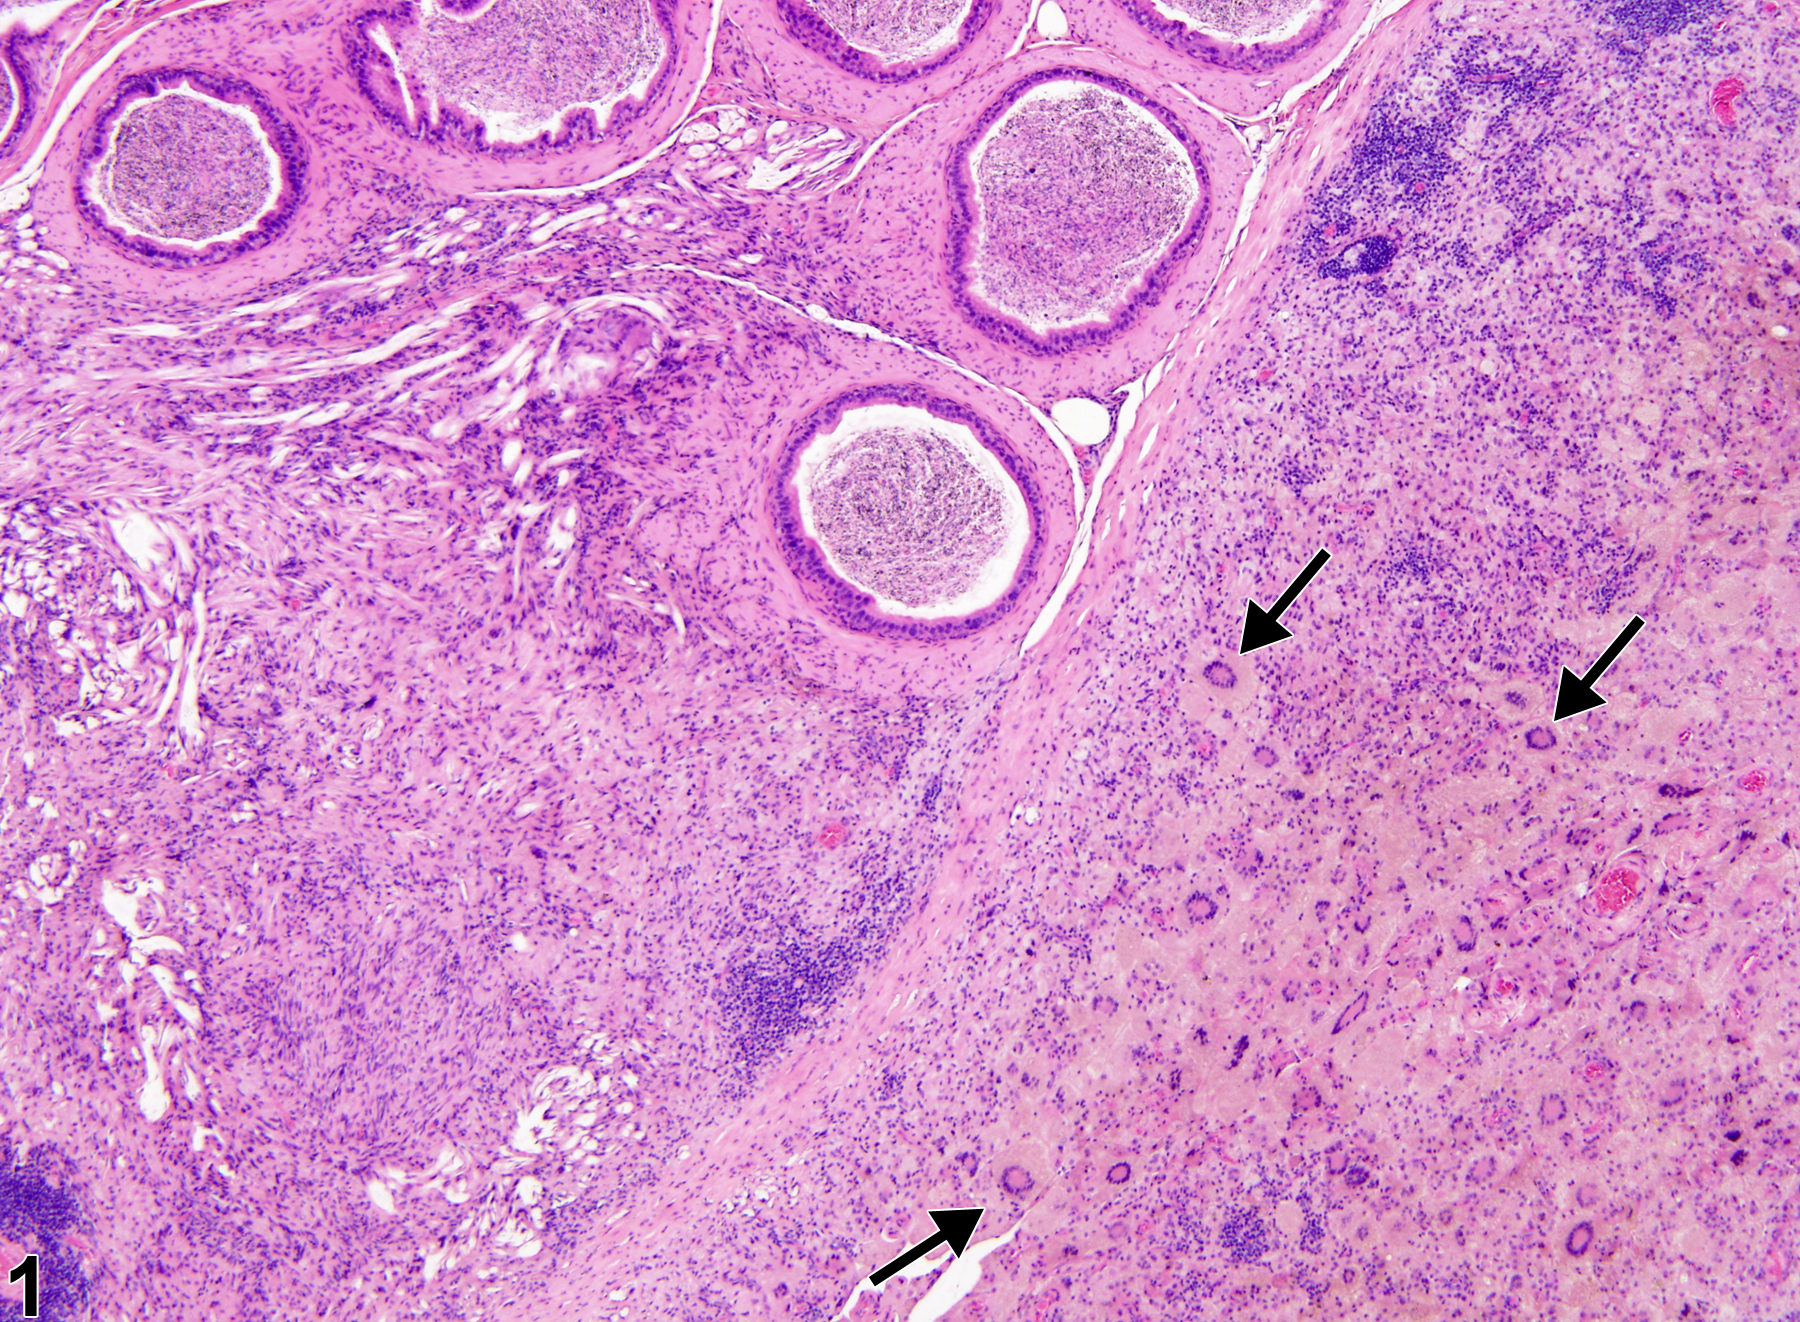 Image of sperm granuloma in the epididymis from a male B6C3F1 mouse in a chronic study